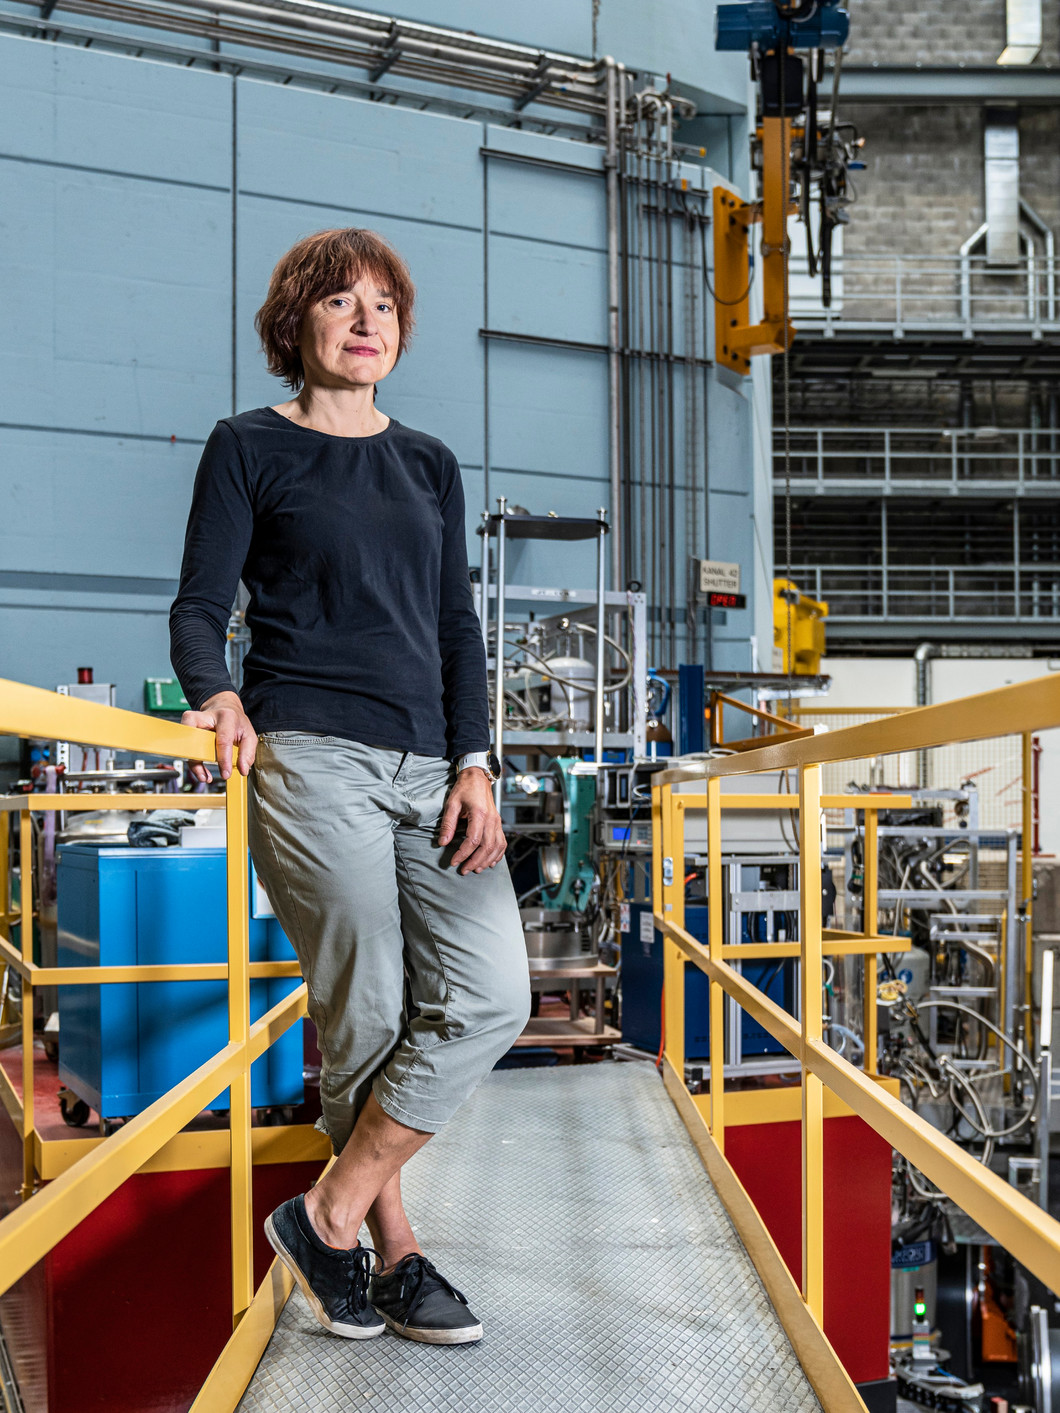 Oksana Zaharko heads the Solid Structures research group at the Paul Scherrer Institute